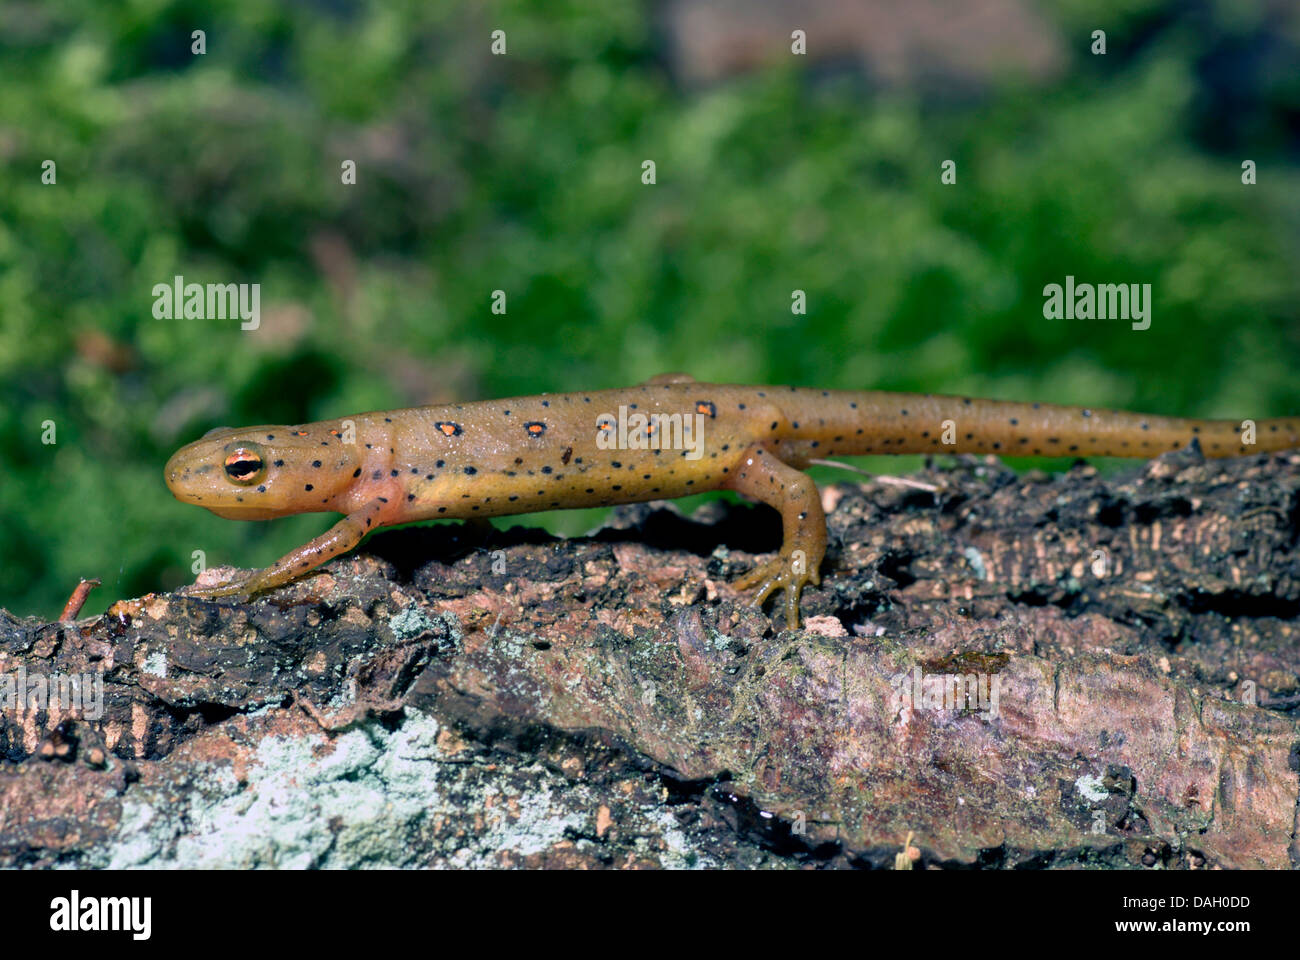 eft, red-spotted newt, red eft, eastern newt (Notophthalmus viridescens), on a branch Stock Photo